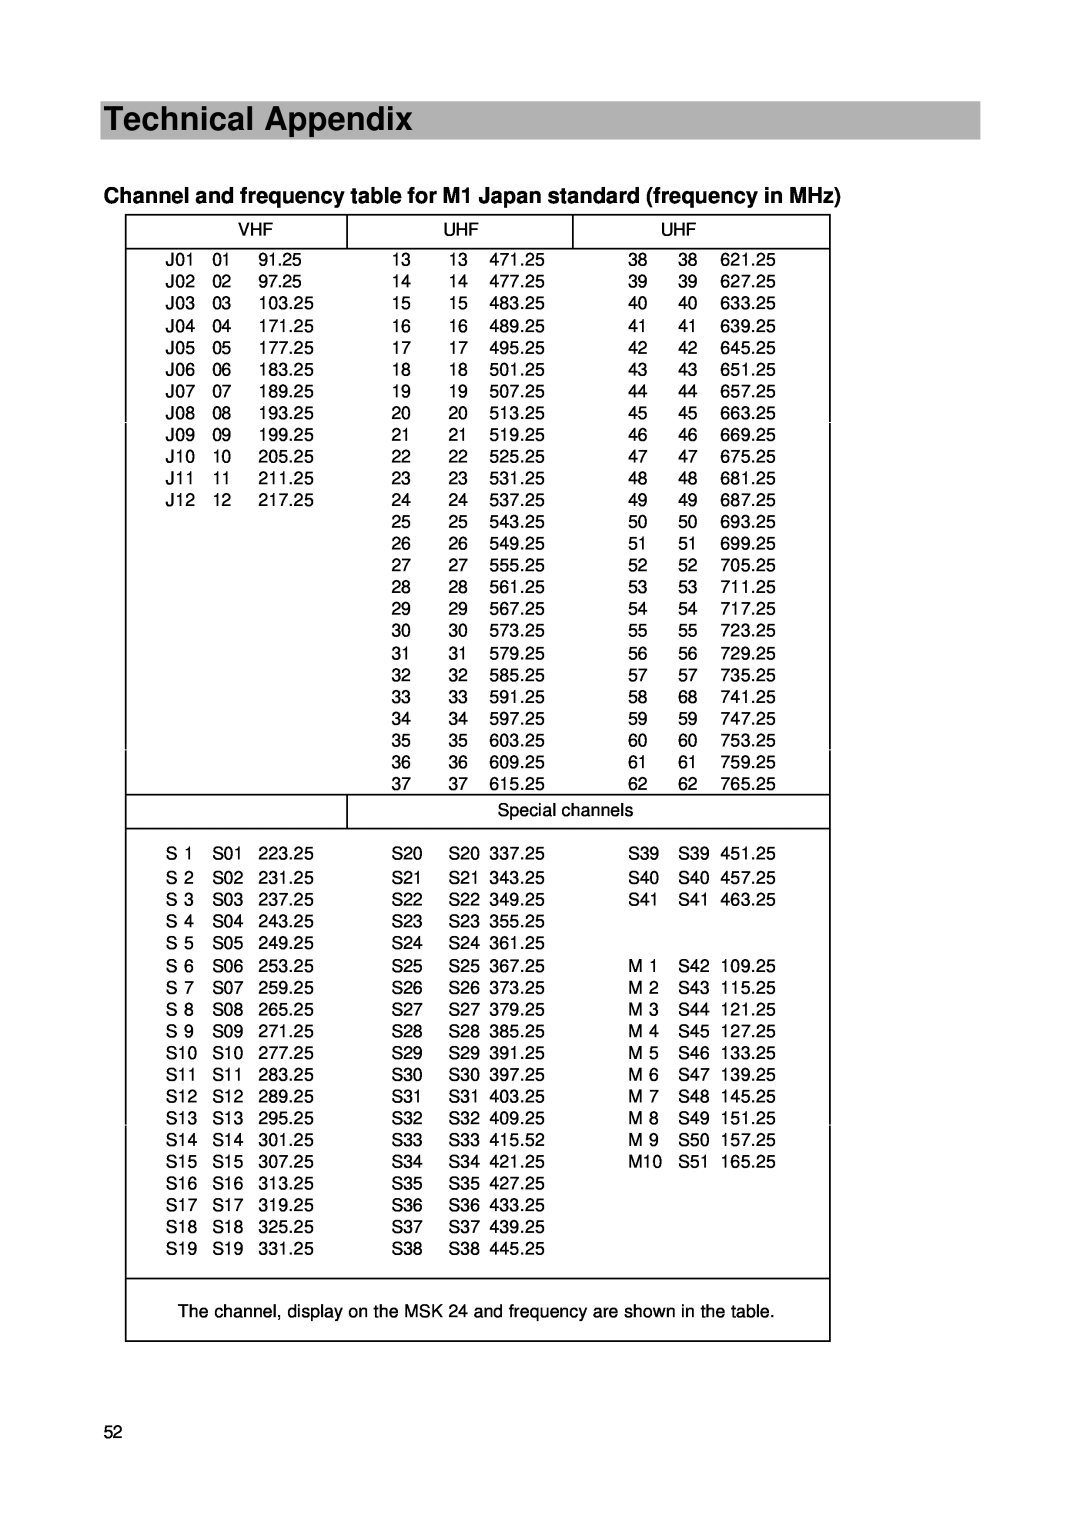 Kathrein MSK 24 manual Channel and frequency table for M1 Japan standard frequency in MHz, Technical Appendix 